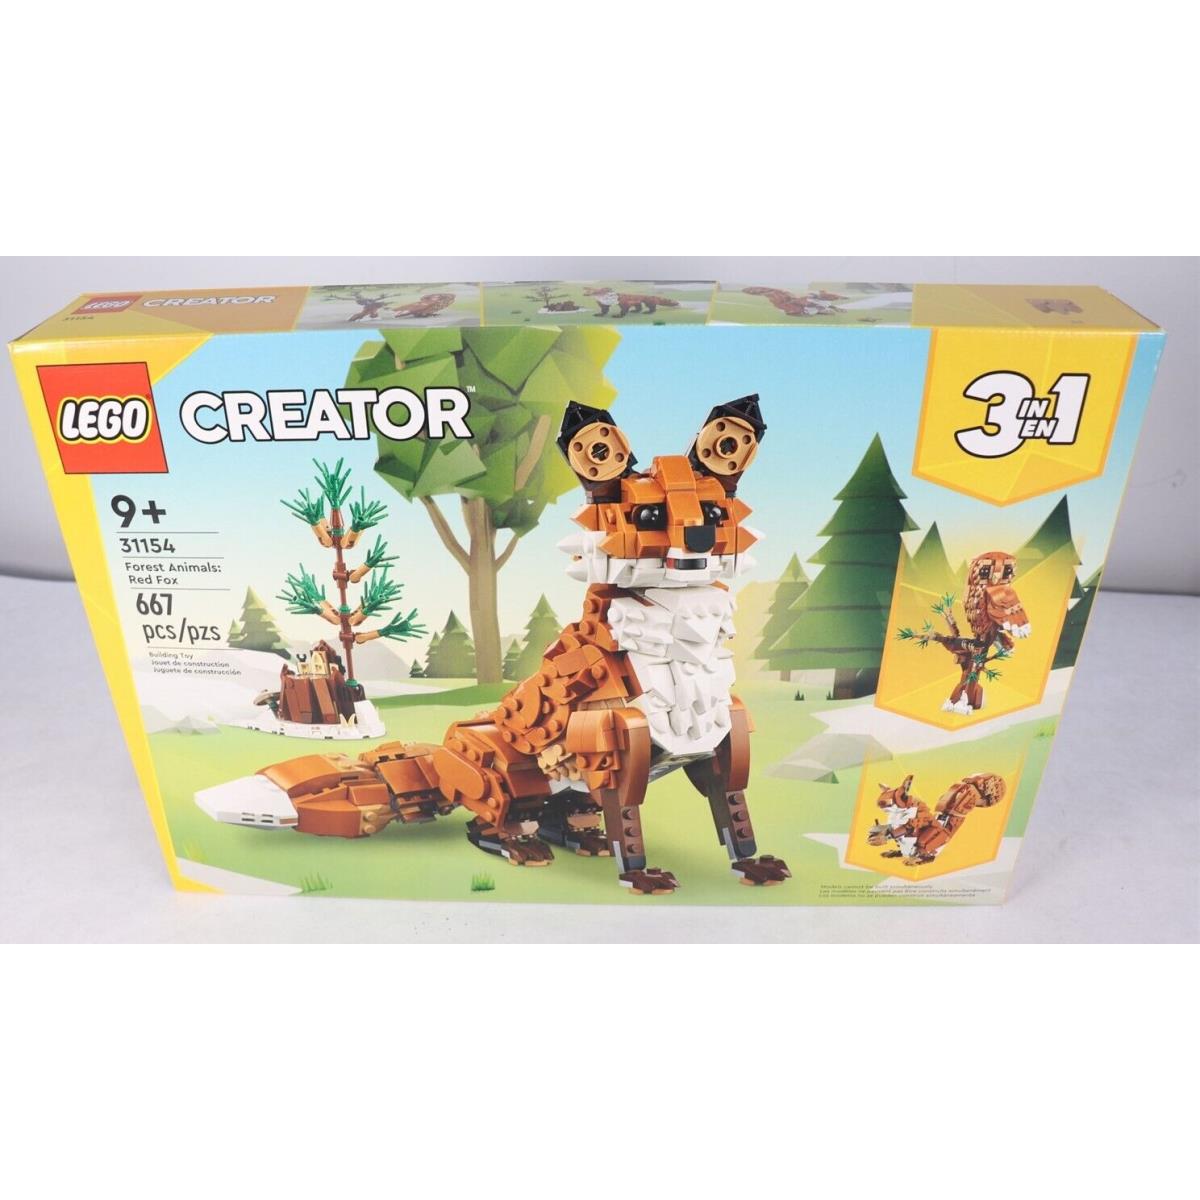 Lego 31154 Creator 3in1 Forest Animals : Red Fox 667pcs